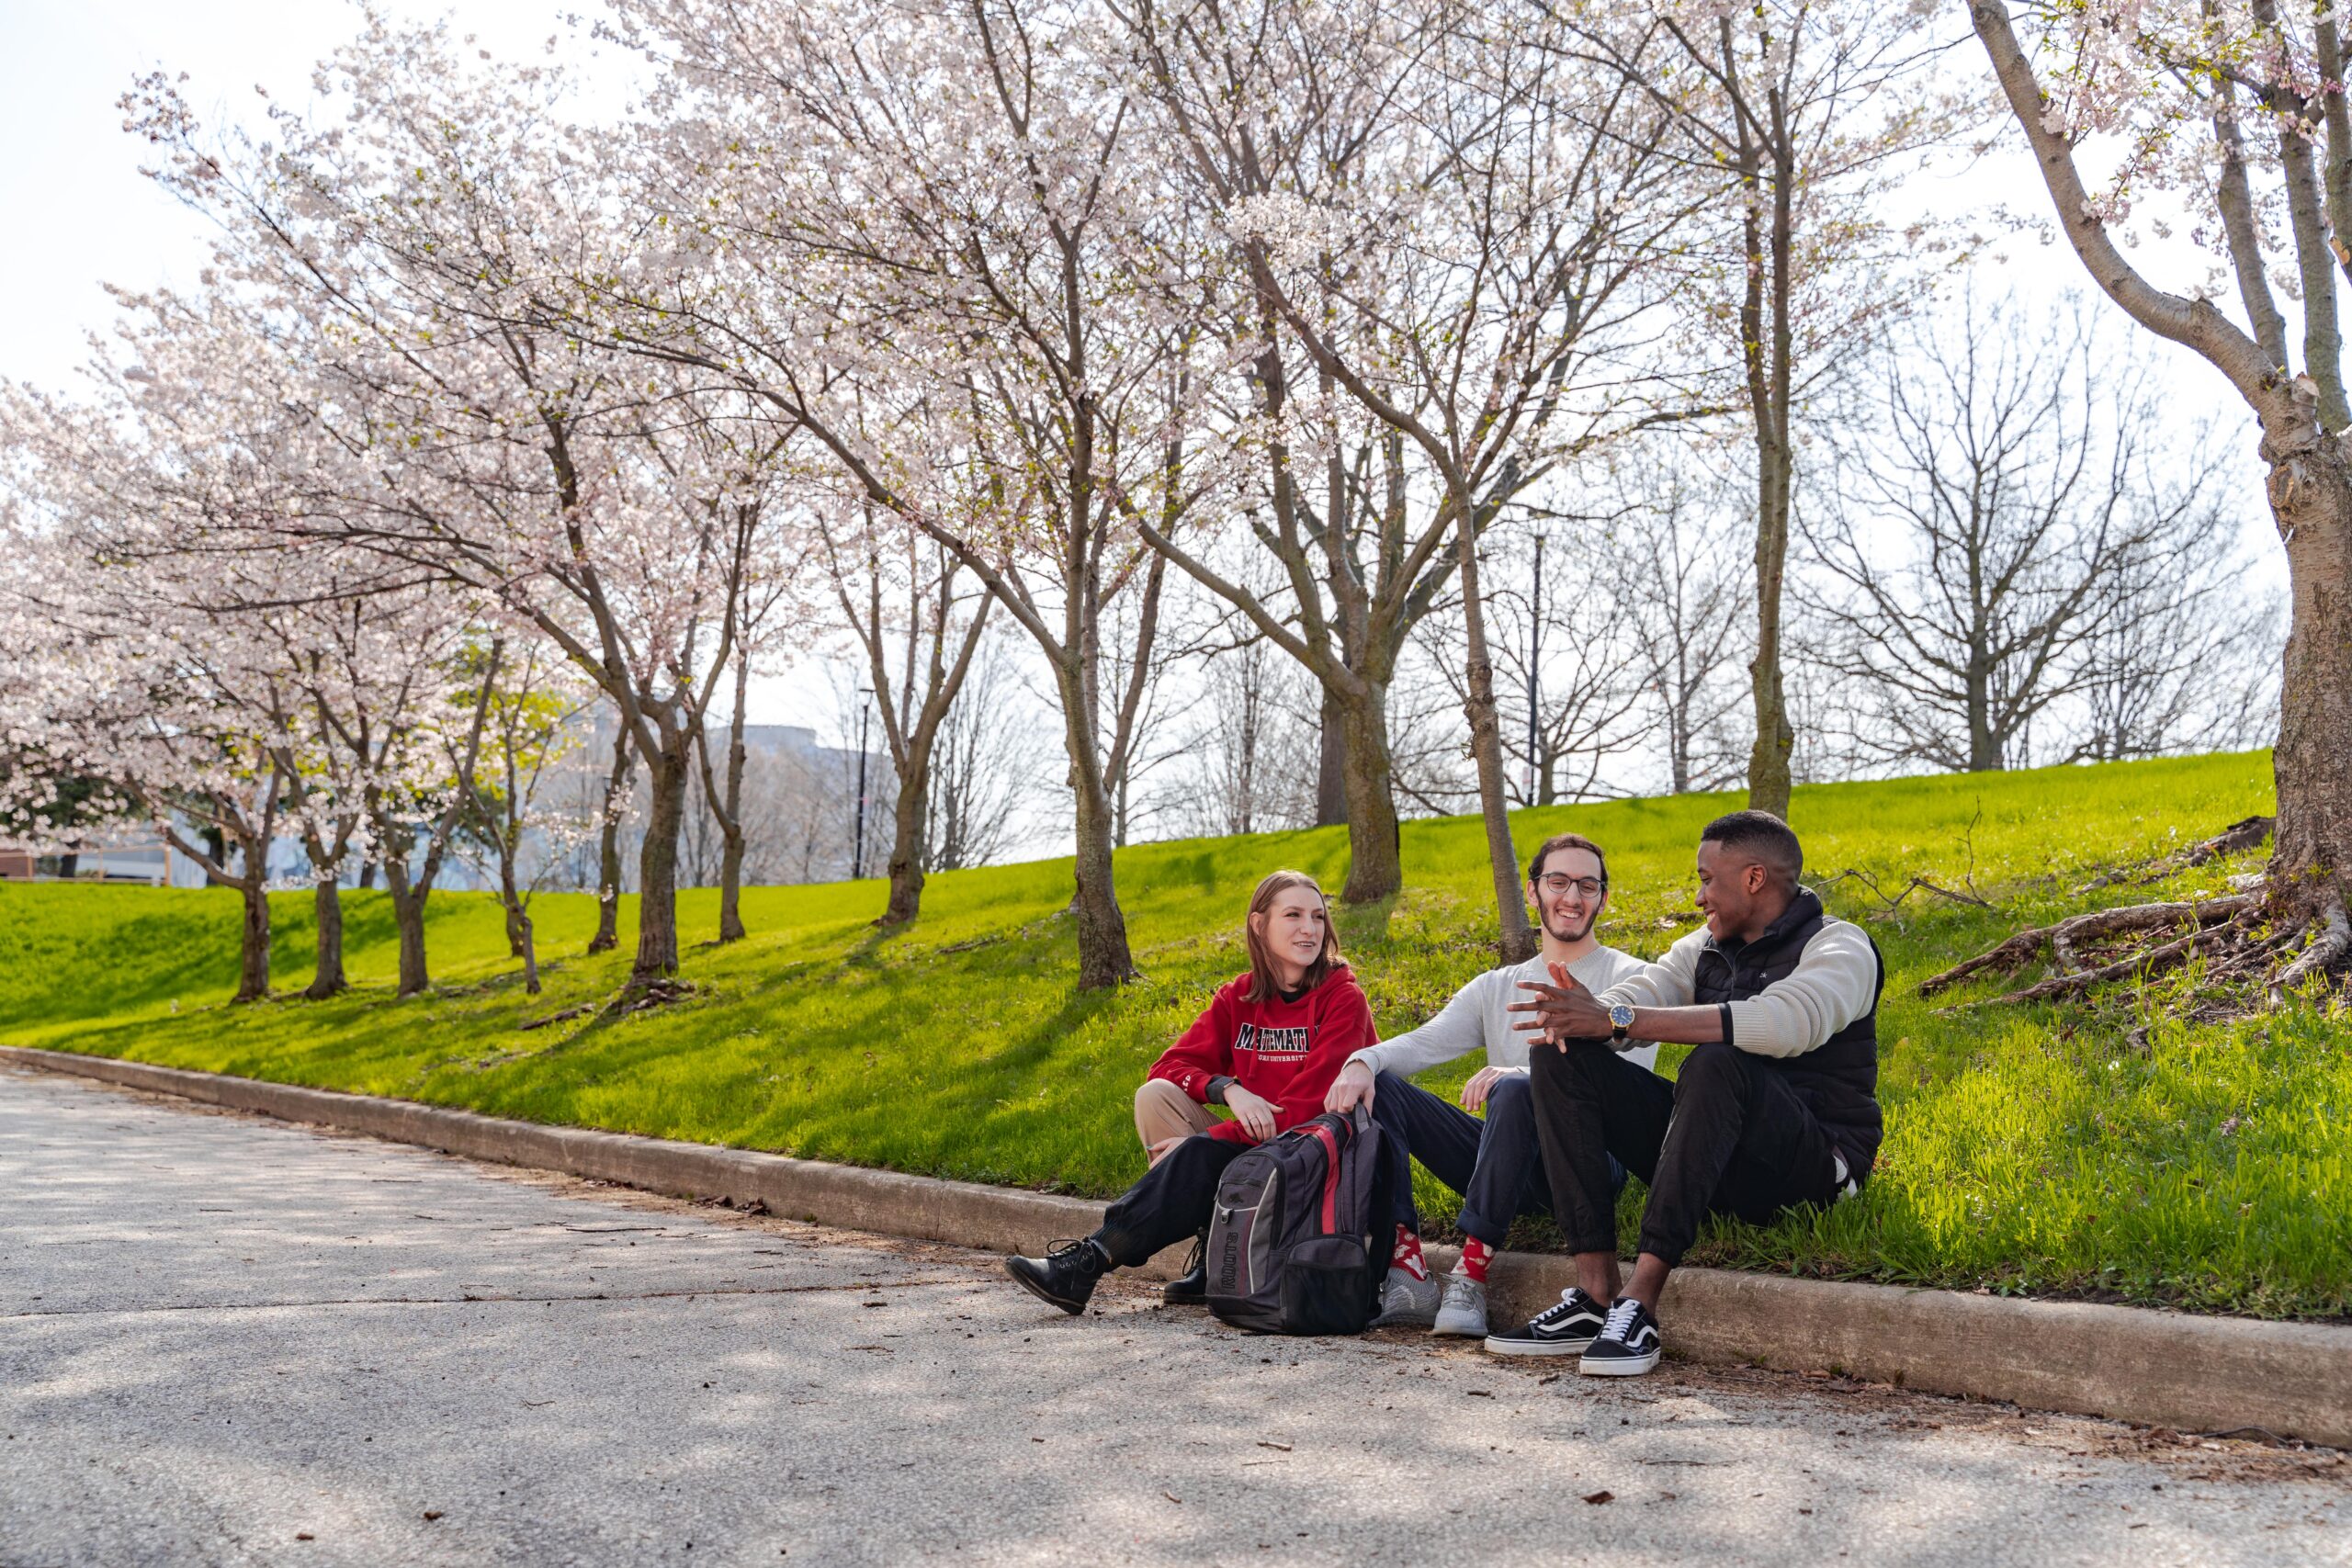 York students chatting outdoors, spring time